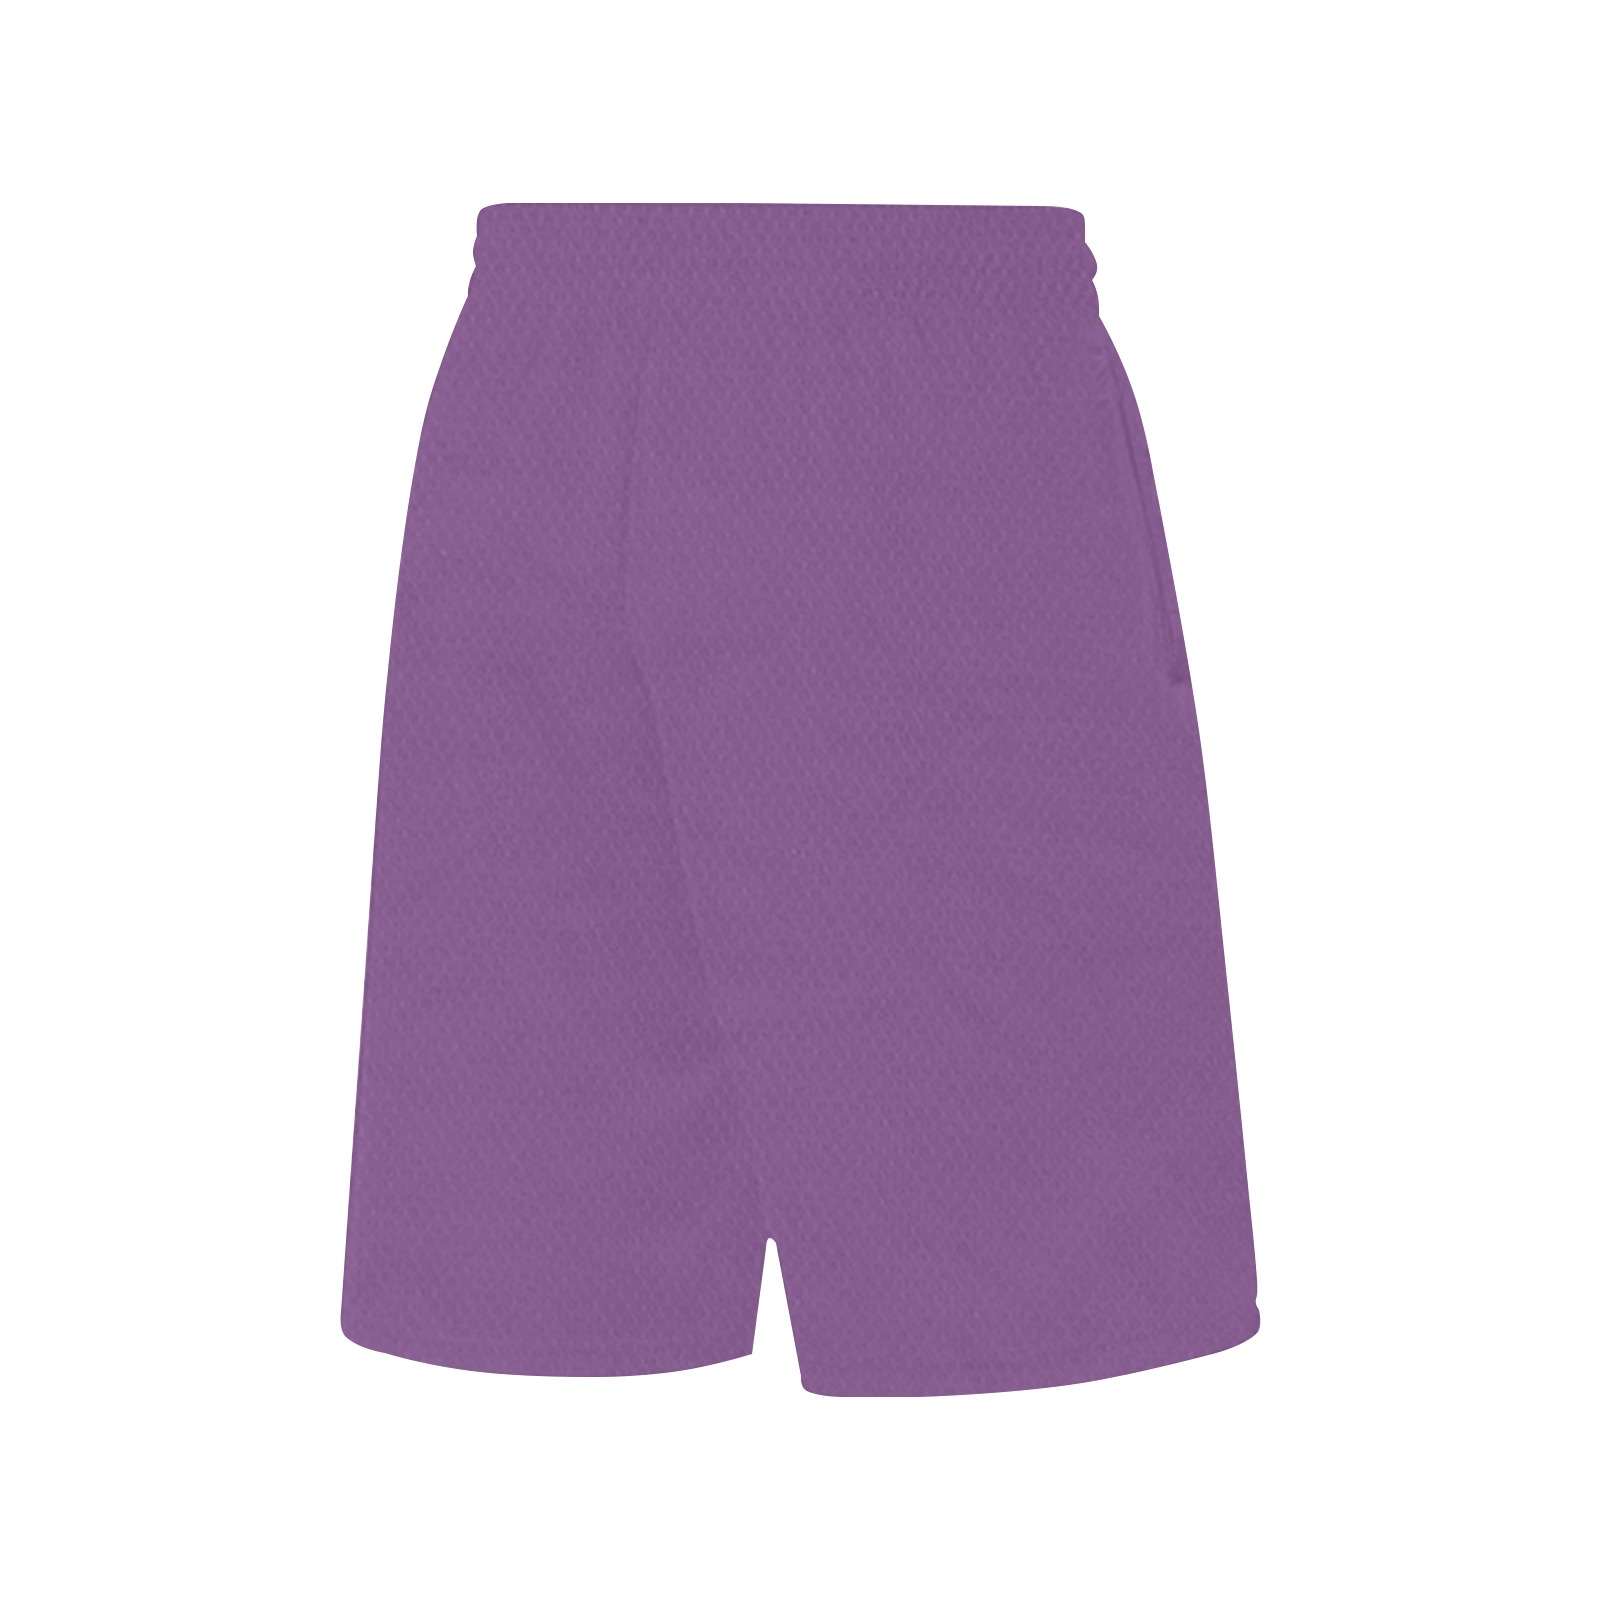 violet All Over Print Basketball Shorts with Pocket